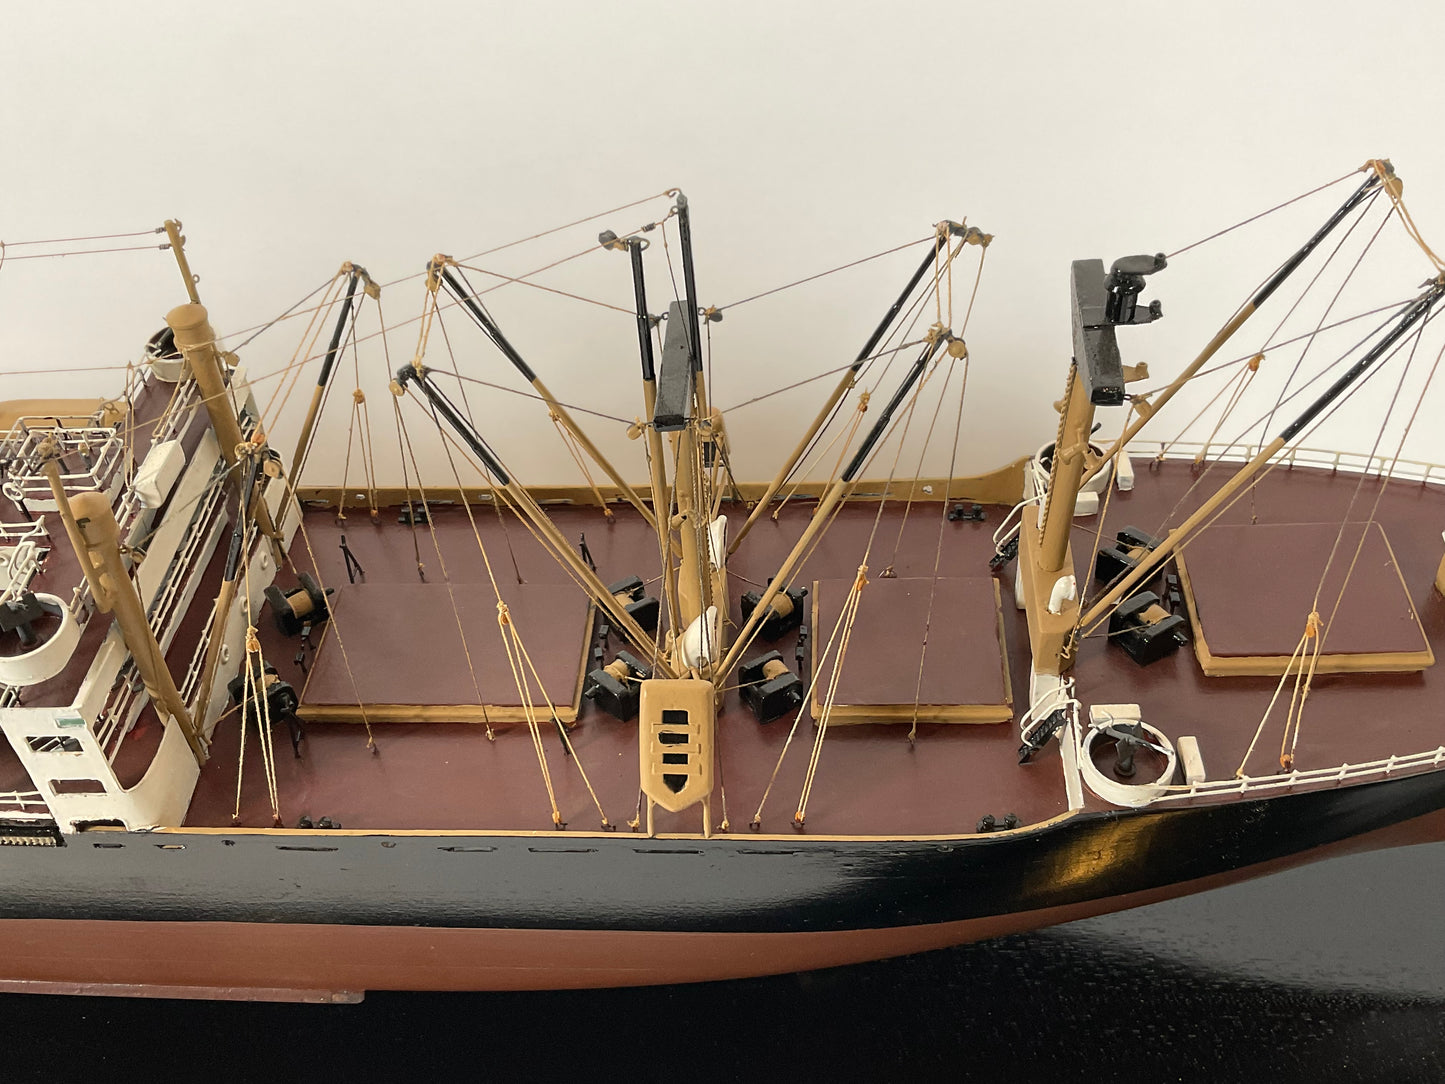 Model of the American Merchant Ship “United States Victory” - Lannan Gallery